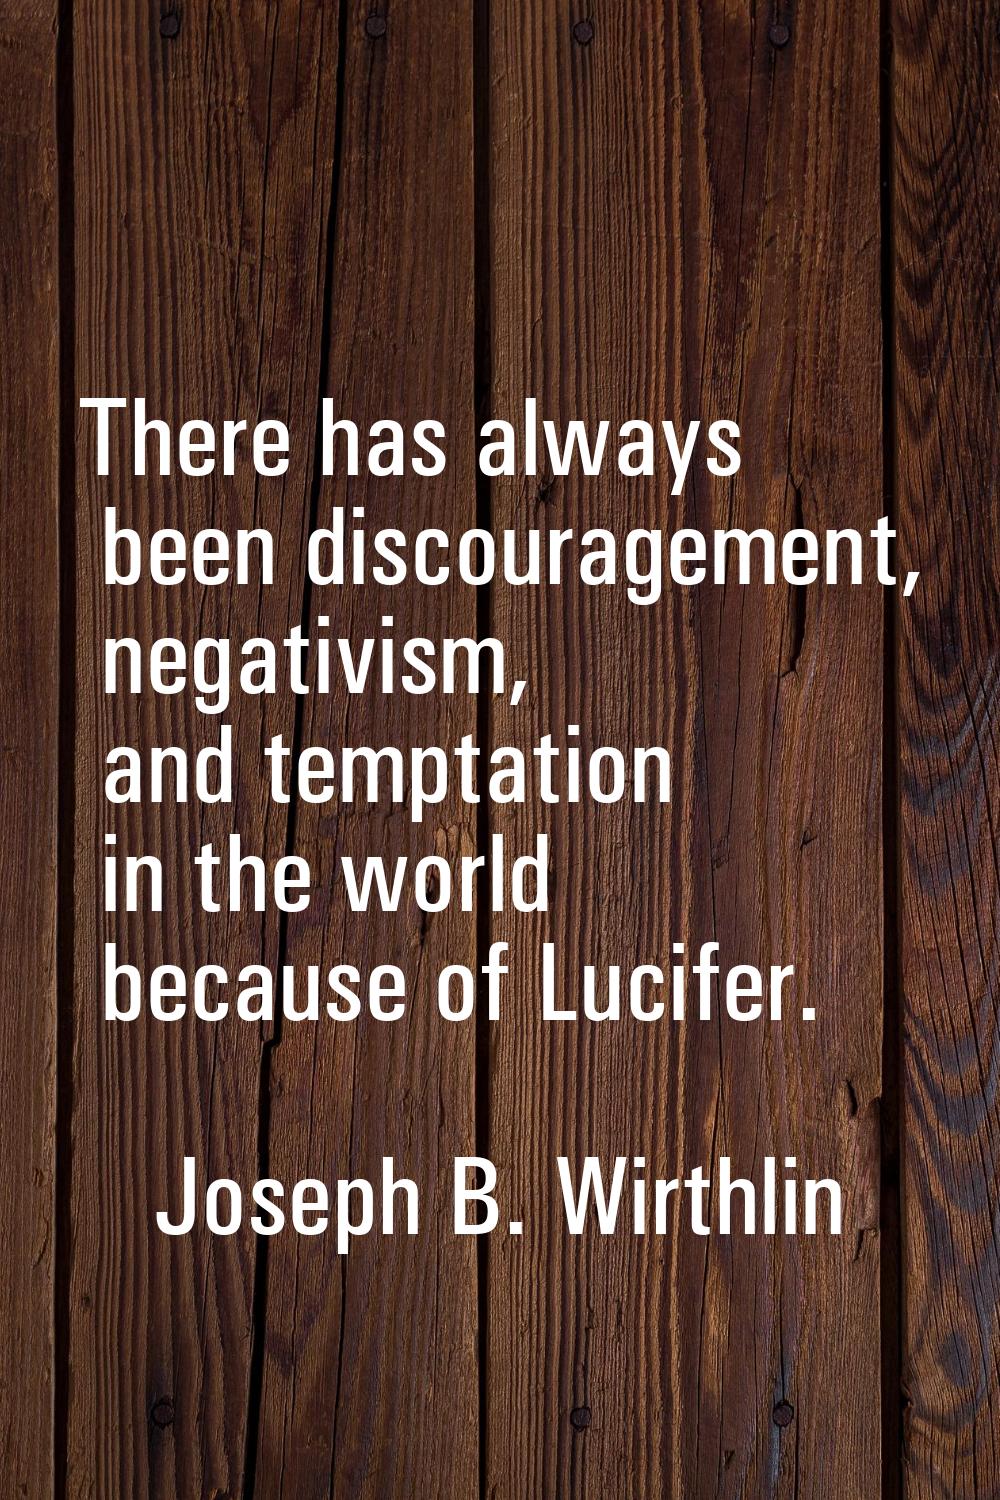 There has always been discouragement, negativism, and temptation in the world because of Lucifer.